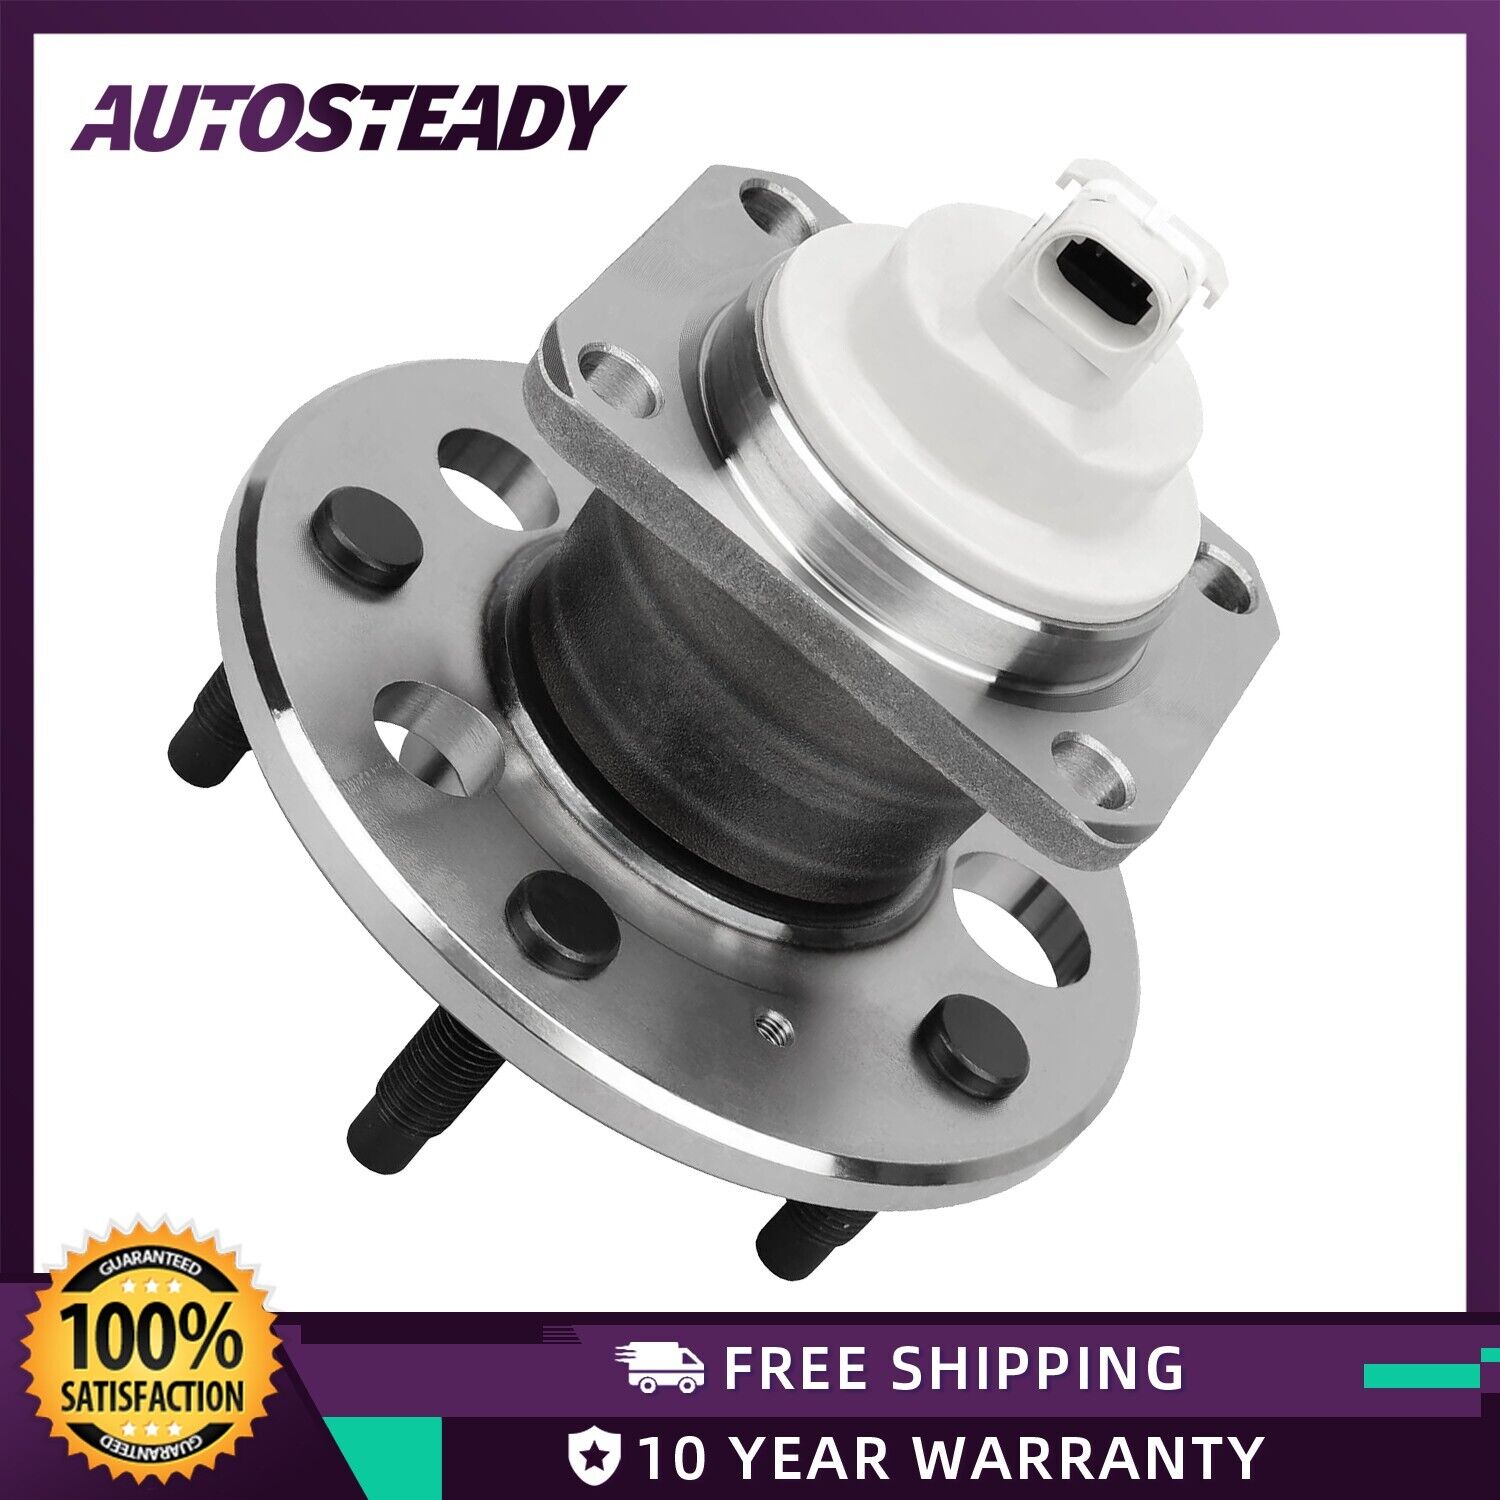 Rear Wheel Hub Bearing For Chevy Impala Buick LaCrosse Pontiac Intrigue Assembly